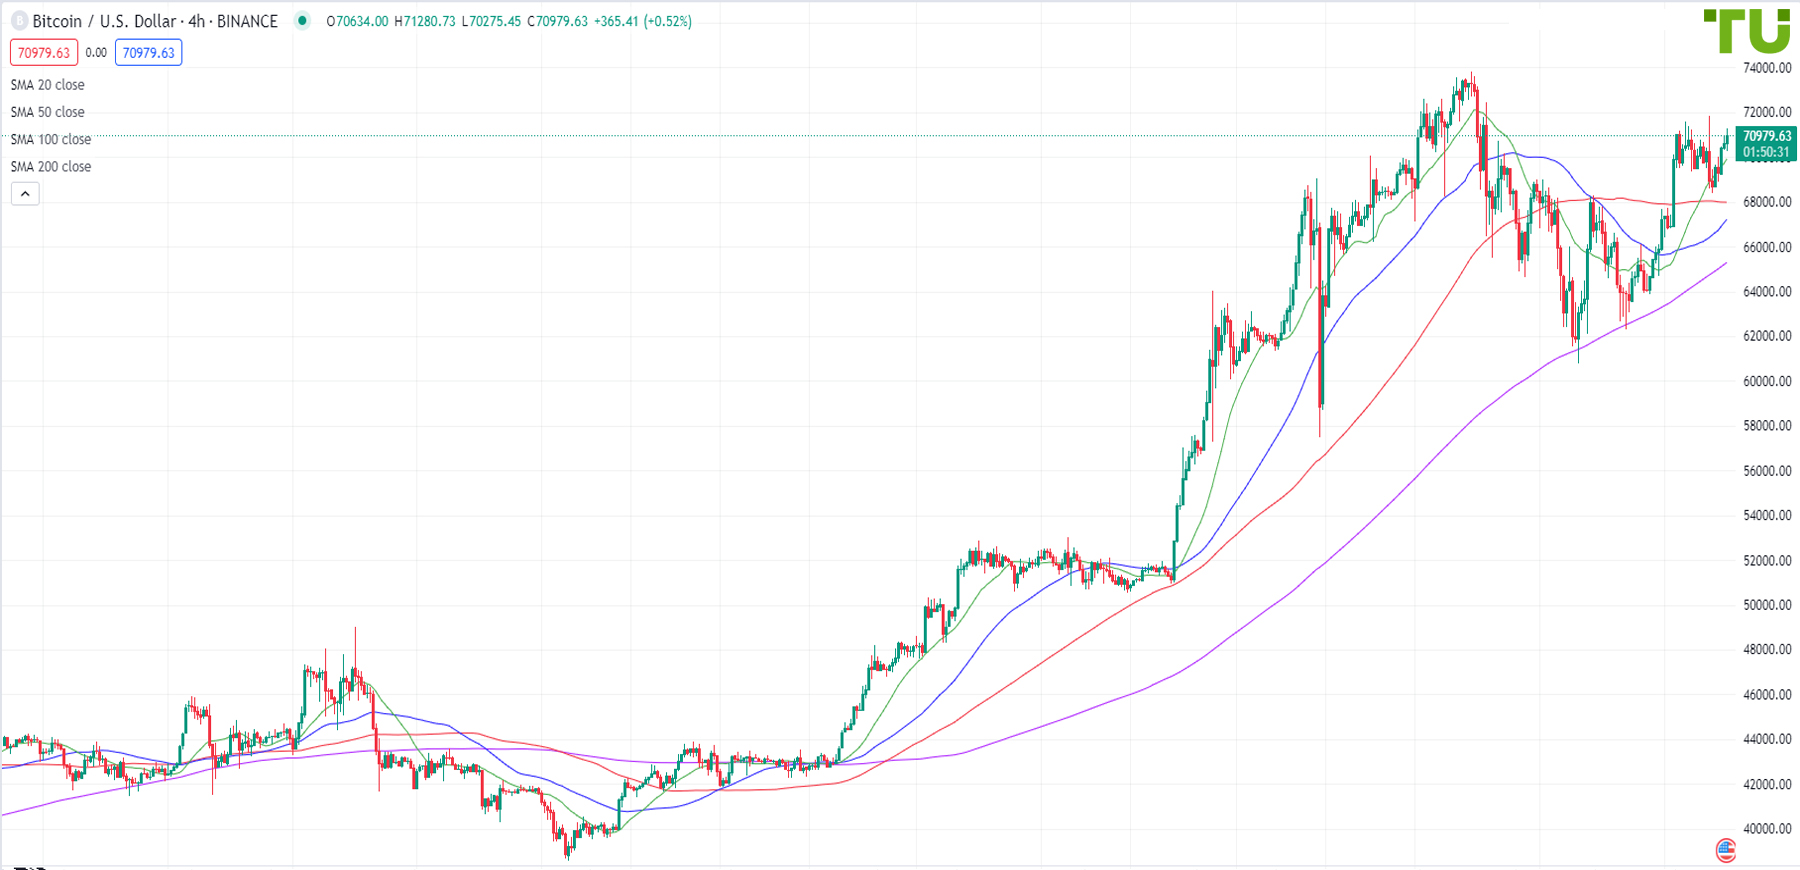 BTC/USD is once again bought back on the decline